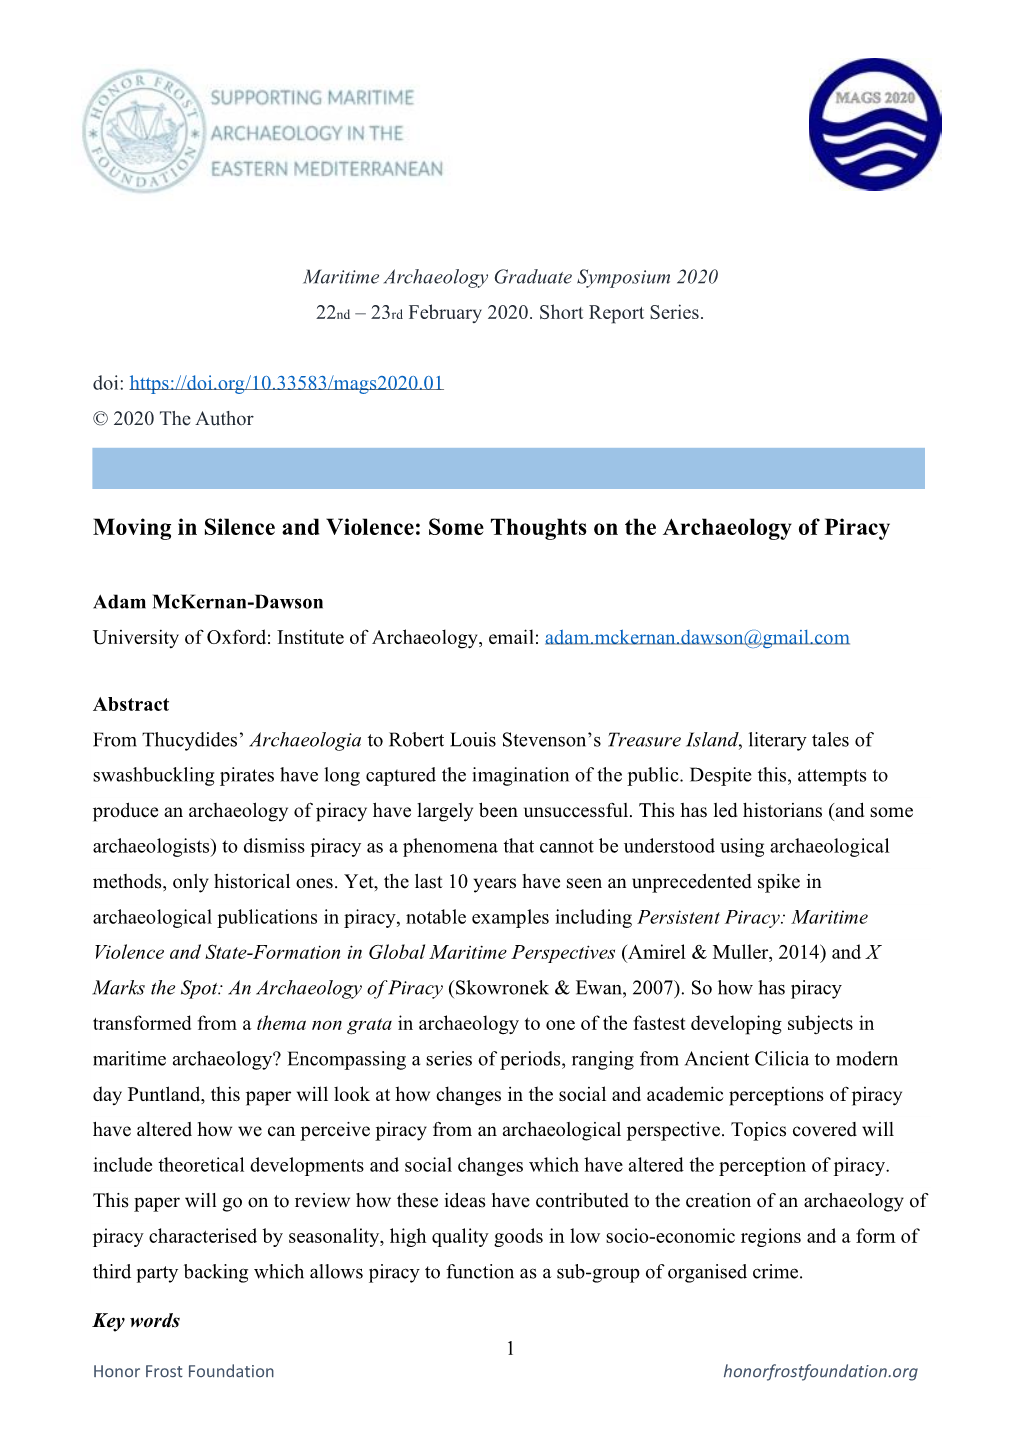 A. Mckernan-Dawson. Moving in Silence and Violence: Some Thoughts on the Archaeology of Piracy